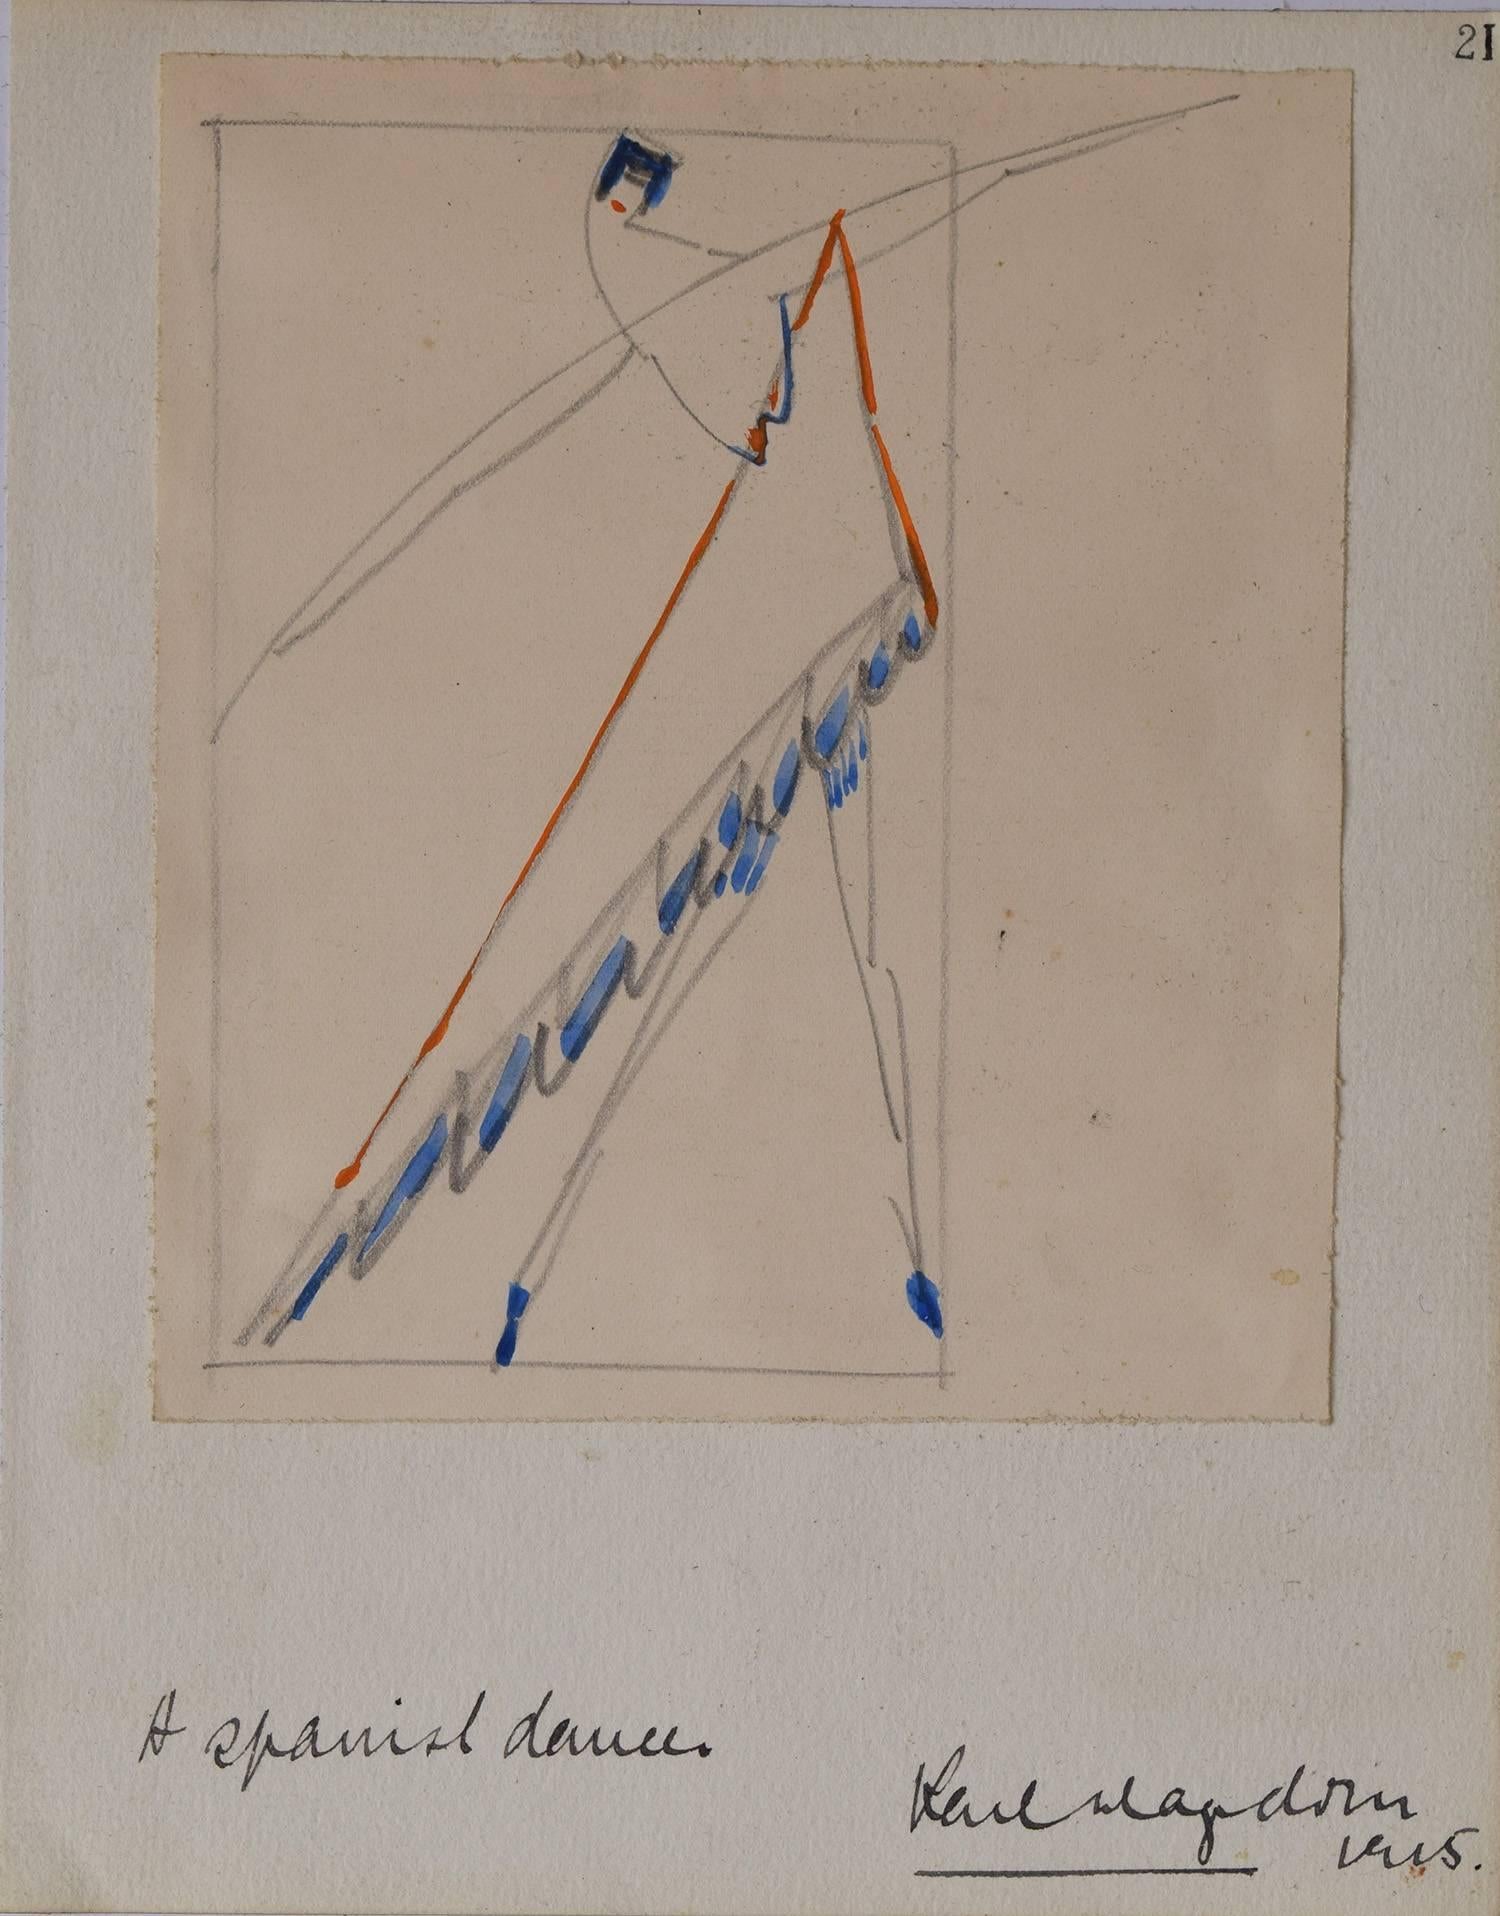 
Wonderfully pioneering and technically skillful cubist drawing.

Titled- A Spanish dancer

Signed indistinctly and dated 1915.

The actual drawing is fixed down to another piece of paper. The actual drawing measures 5.5 x 5 inches. The lower piece